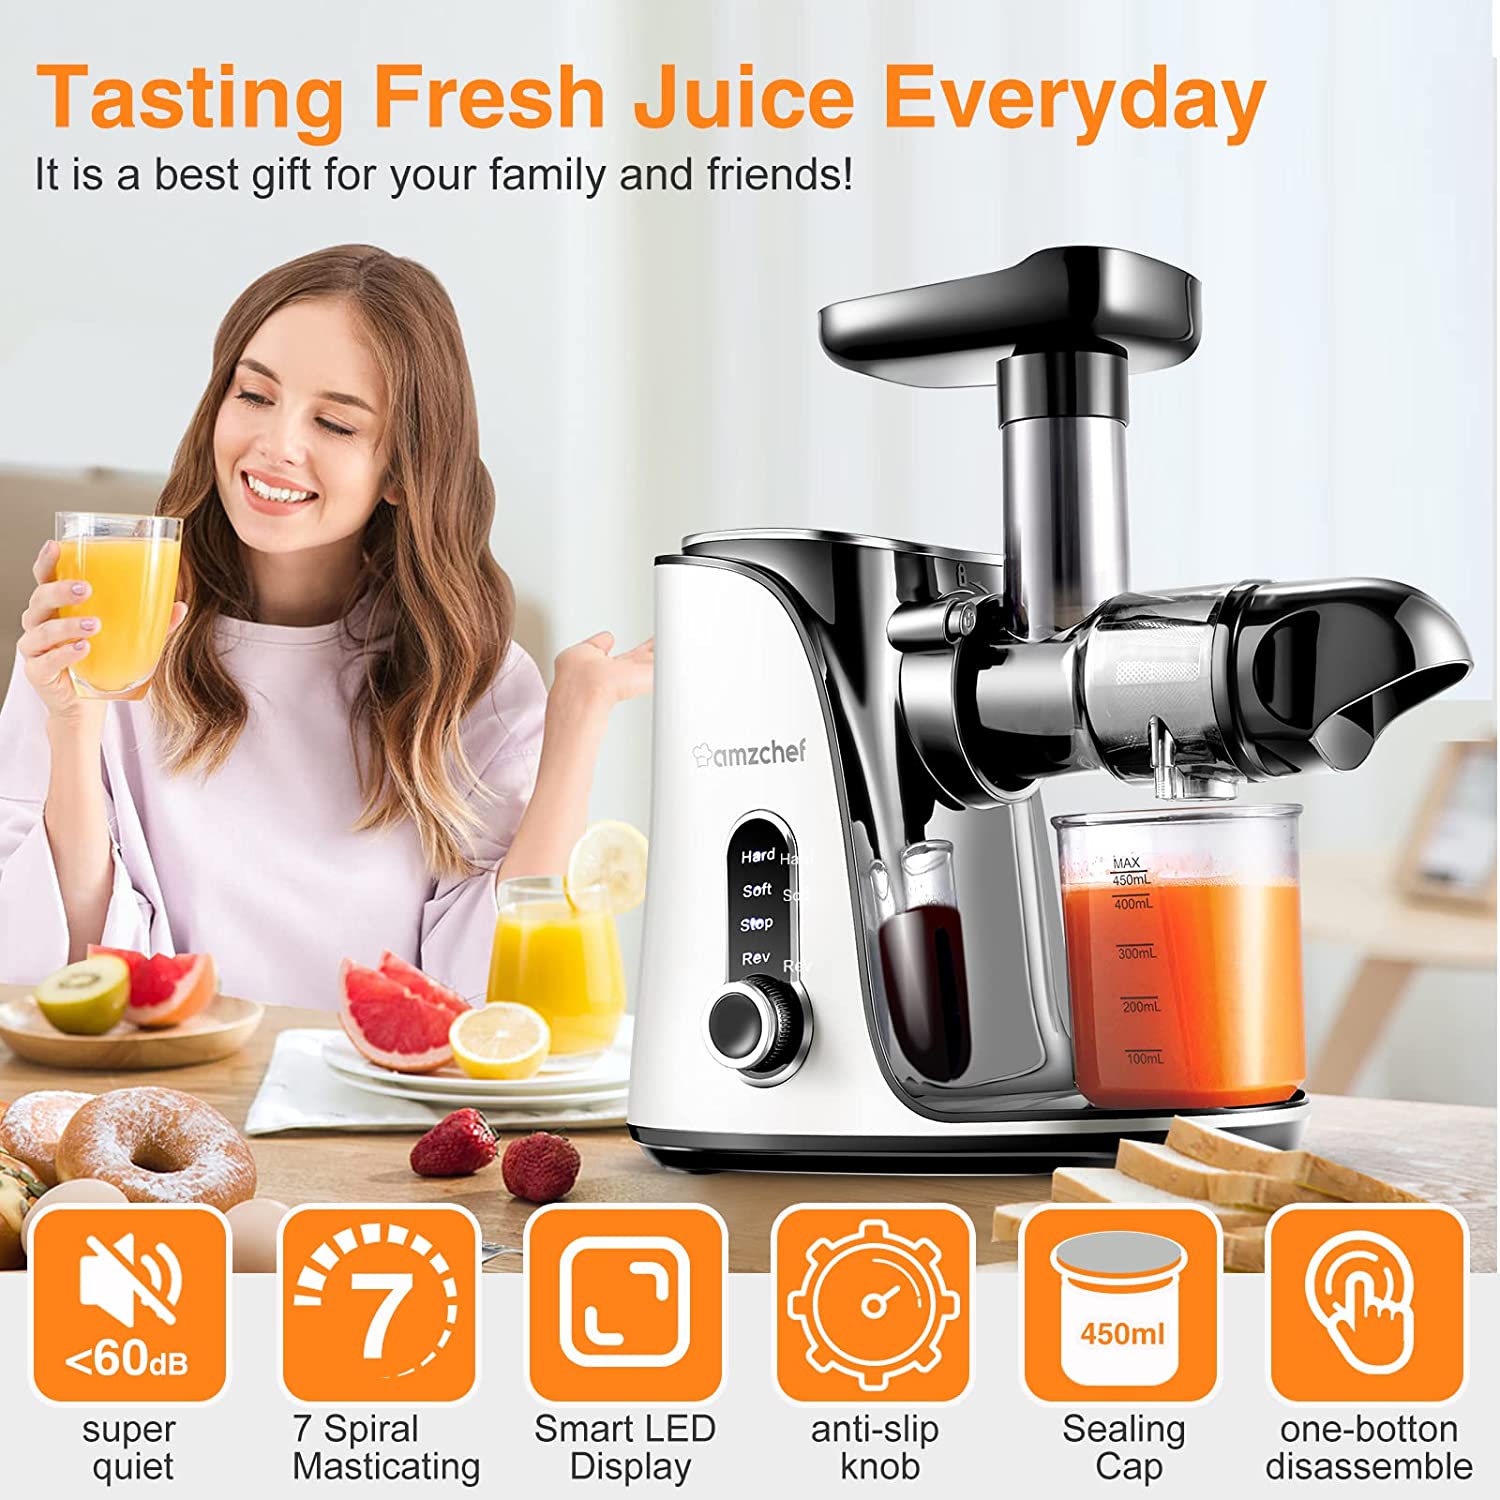 AMZCHEF Is One Of The Best Cheap Slow Juicers